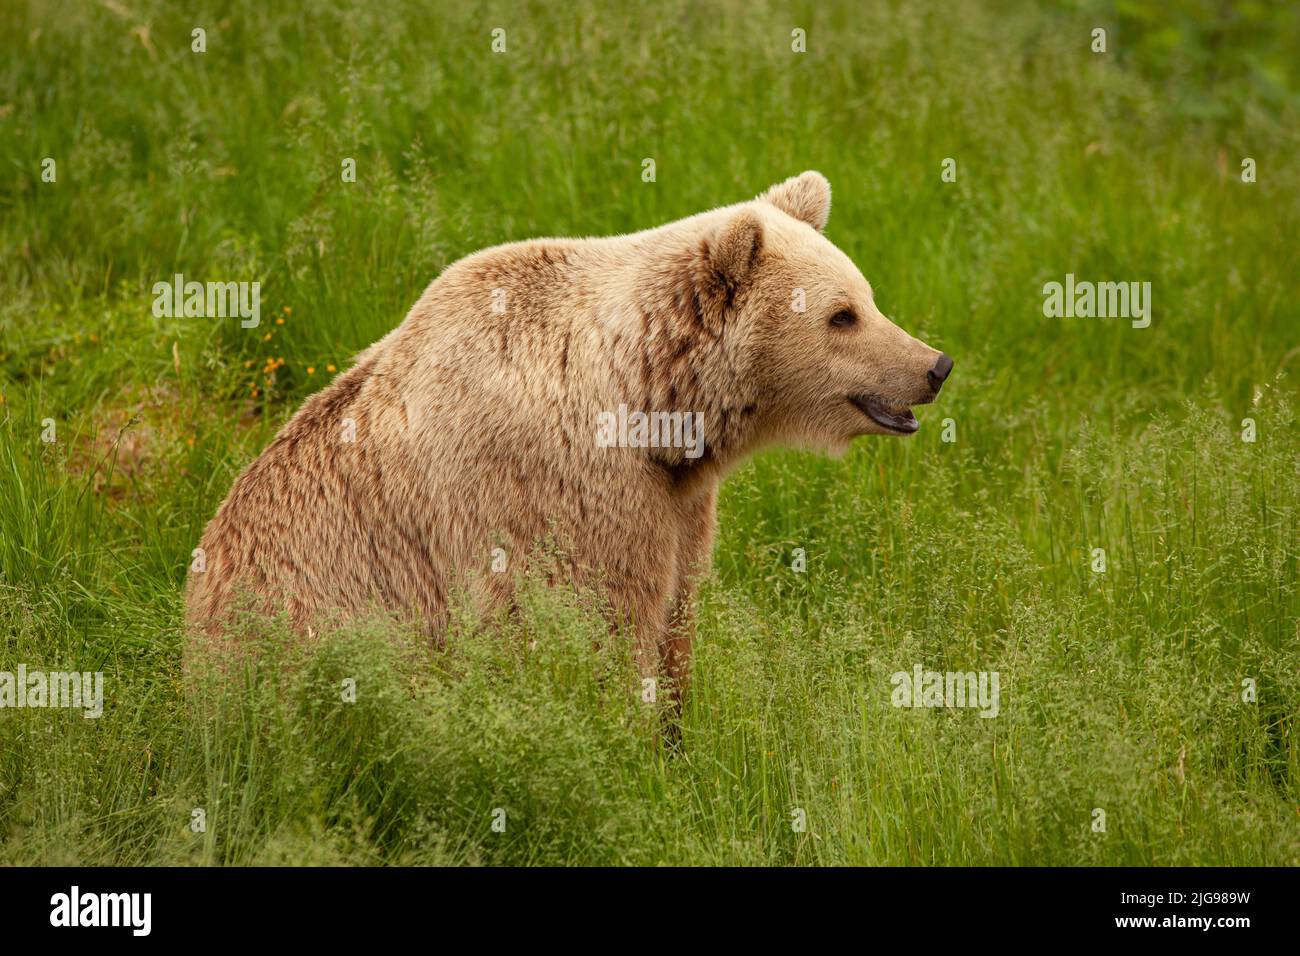 Large young brown bear sitting in grass. Big and dangerous animal in wild. Bear looking straight ahead, meadow, ears and muzzle closeup. Stock Photo